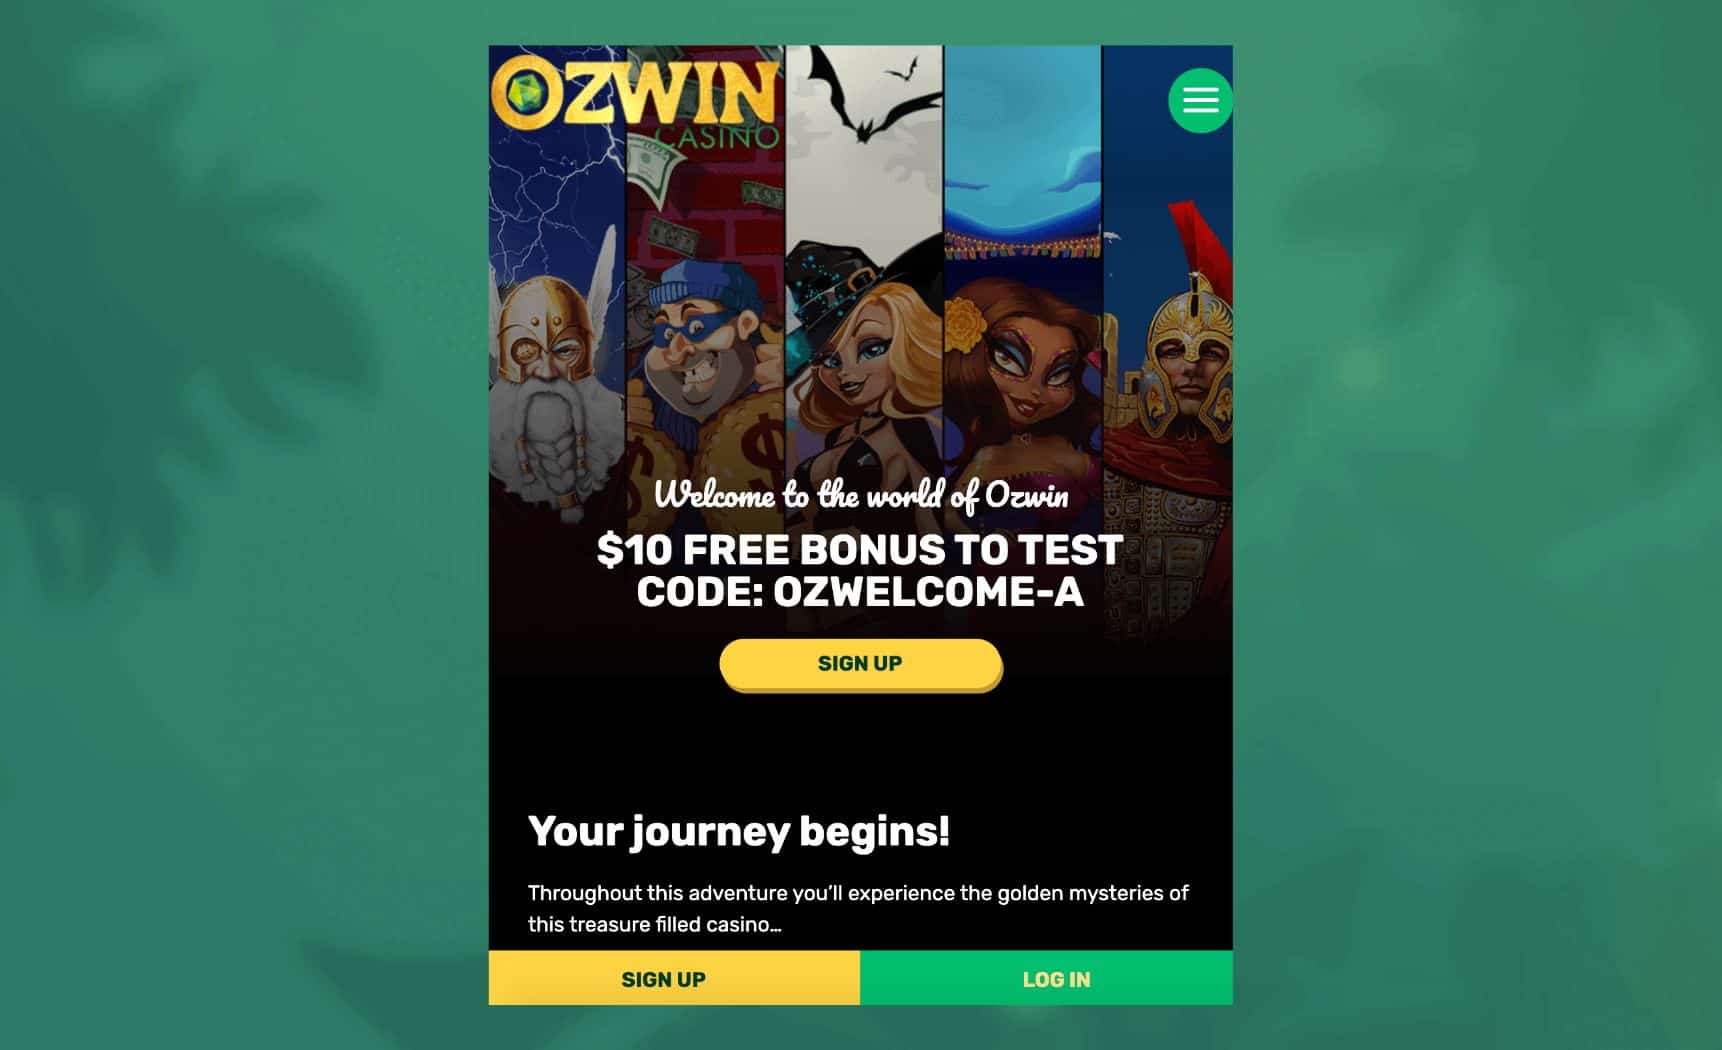 Open Ozwin Casino mobile website on your device